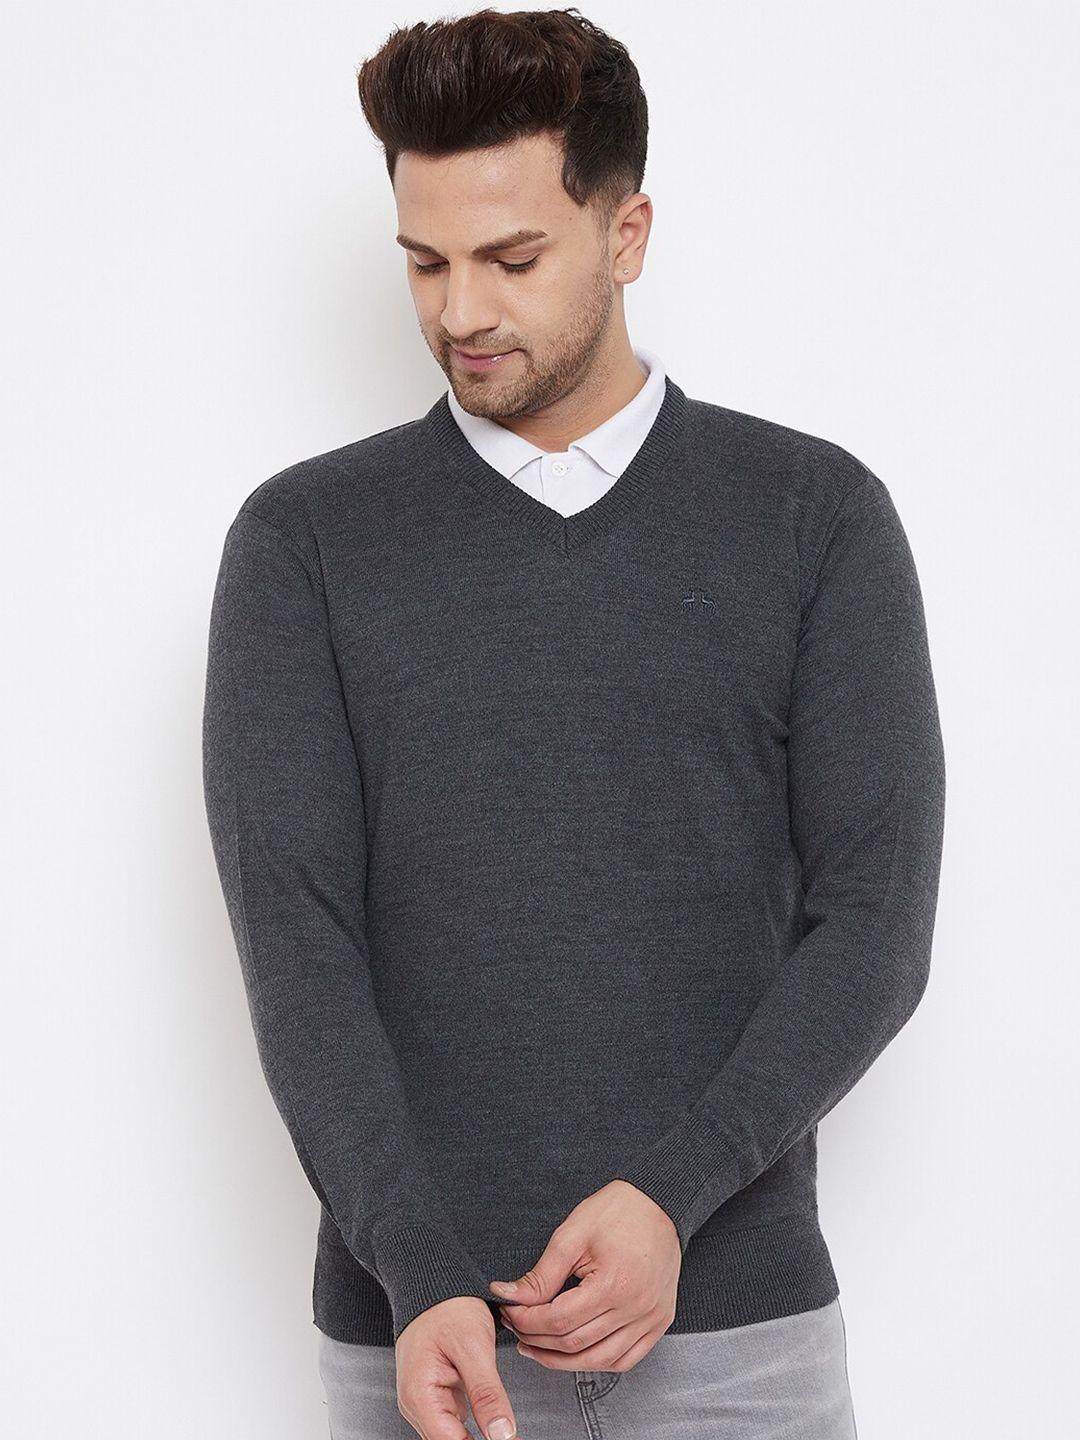 98-degree-north-men-charcoal-sweater